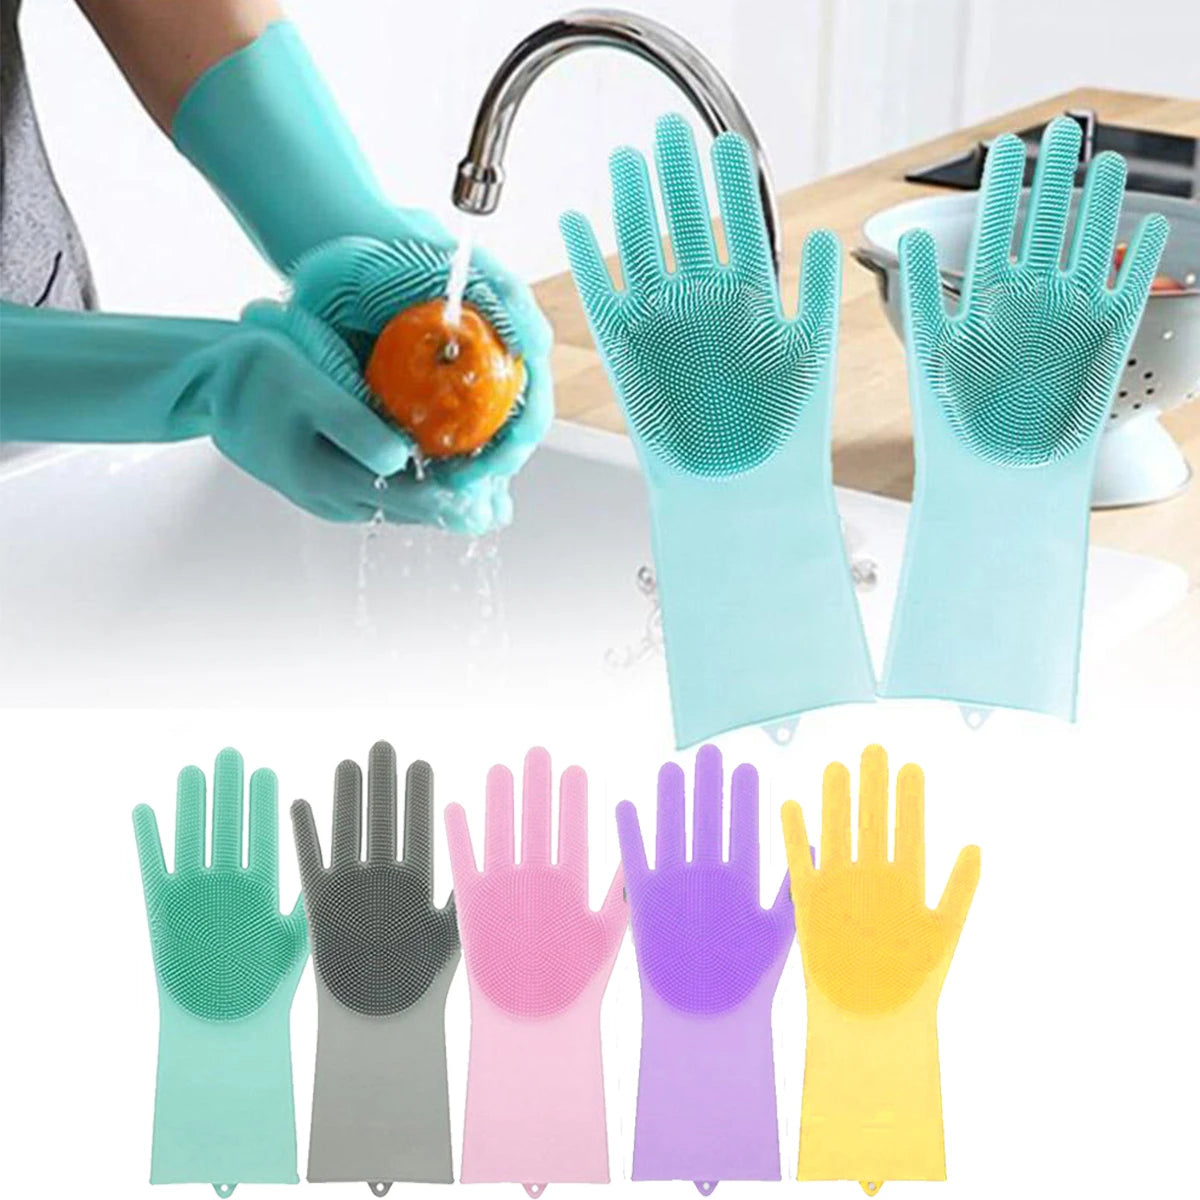 Silicone Dishwashing Gloves Kitchen Cleaning Dish Washing Brushes Rubber Scrub Gloves Food Grade Cleaning Tools